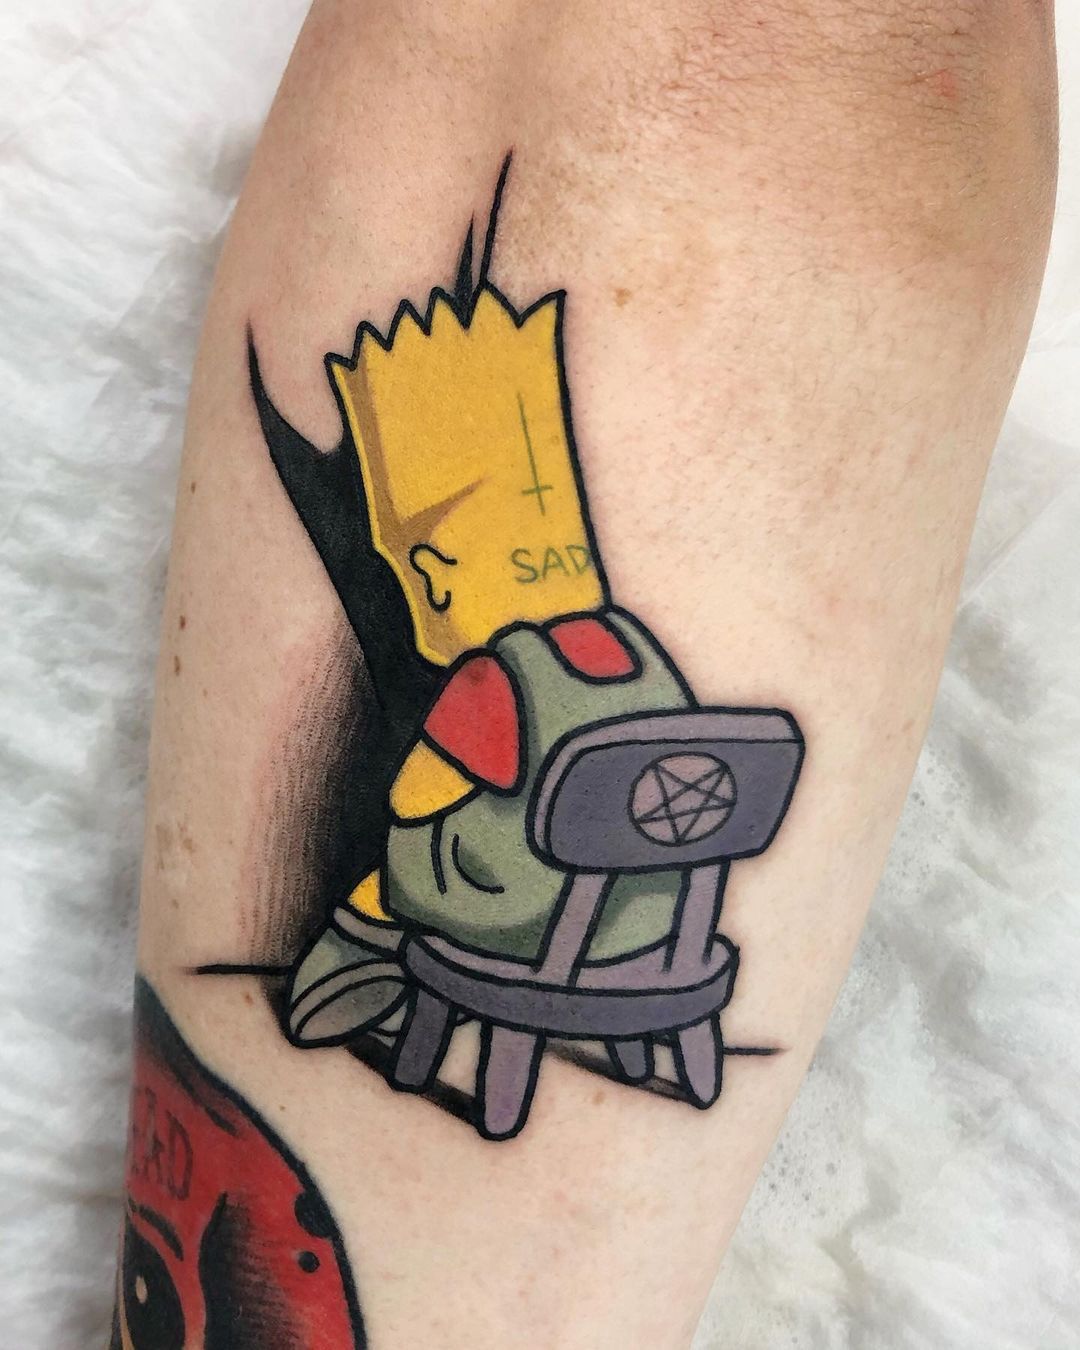 Simpsons tattoo idea I want it to have a traditional style look   rTattooDesigns